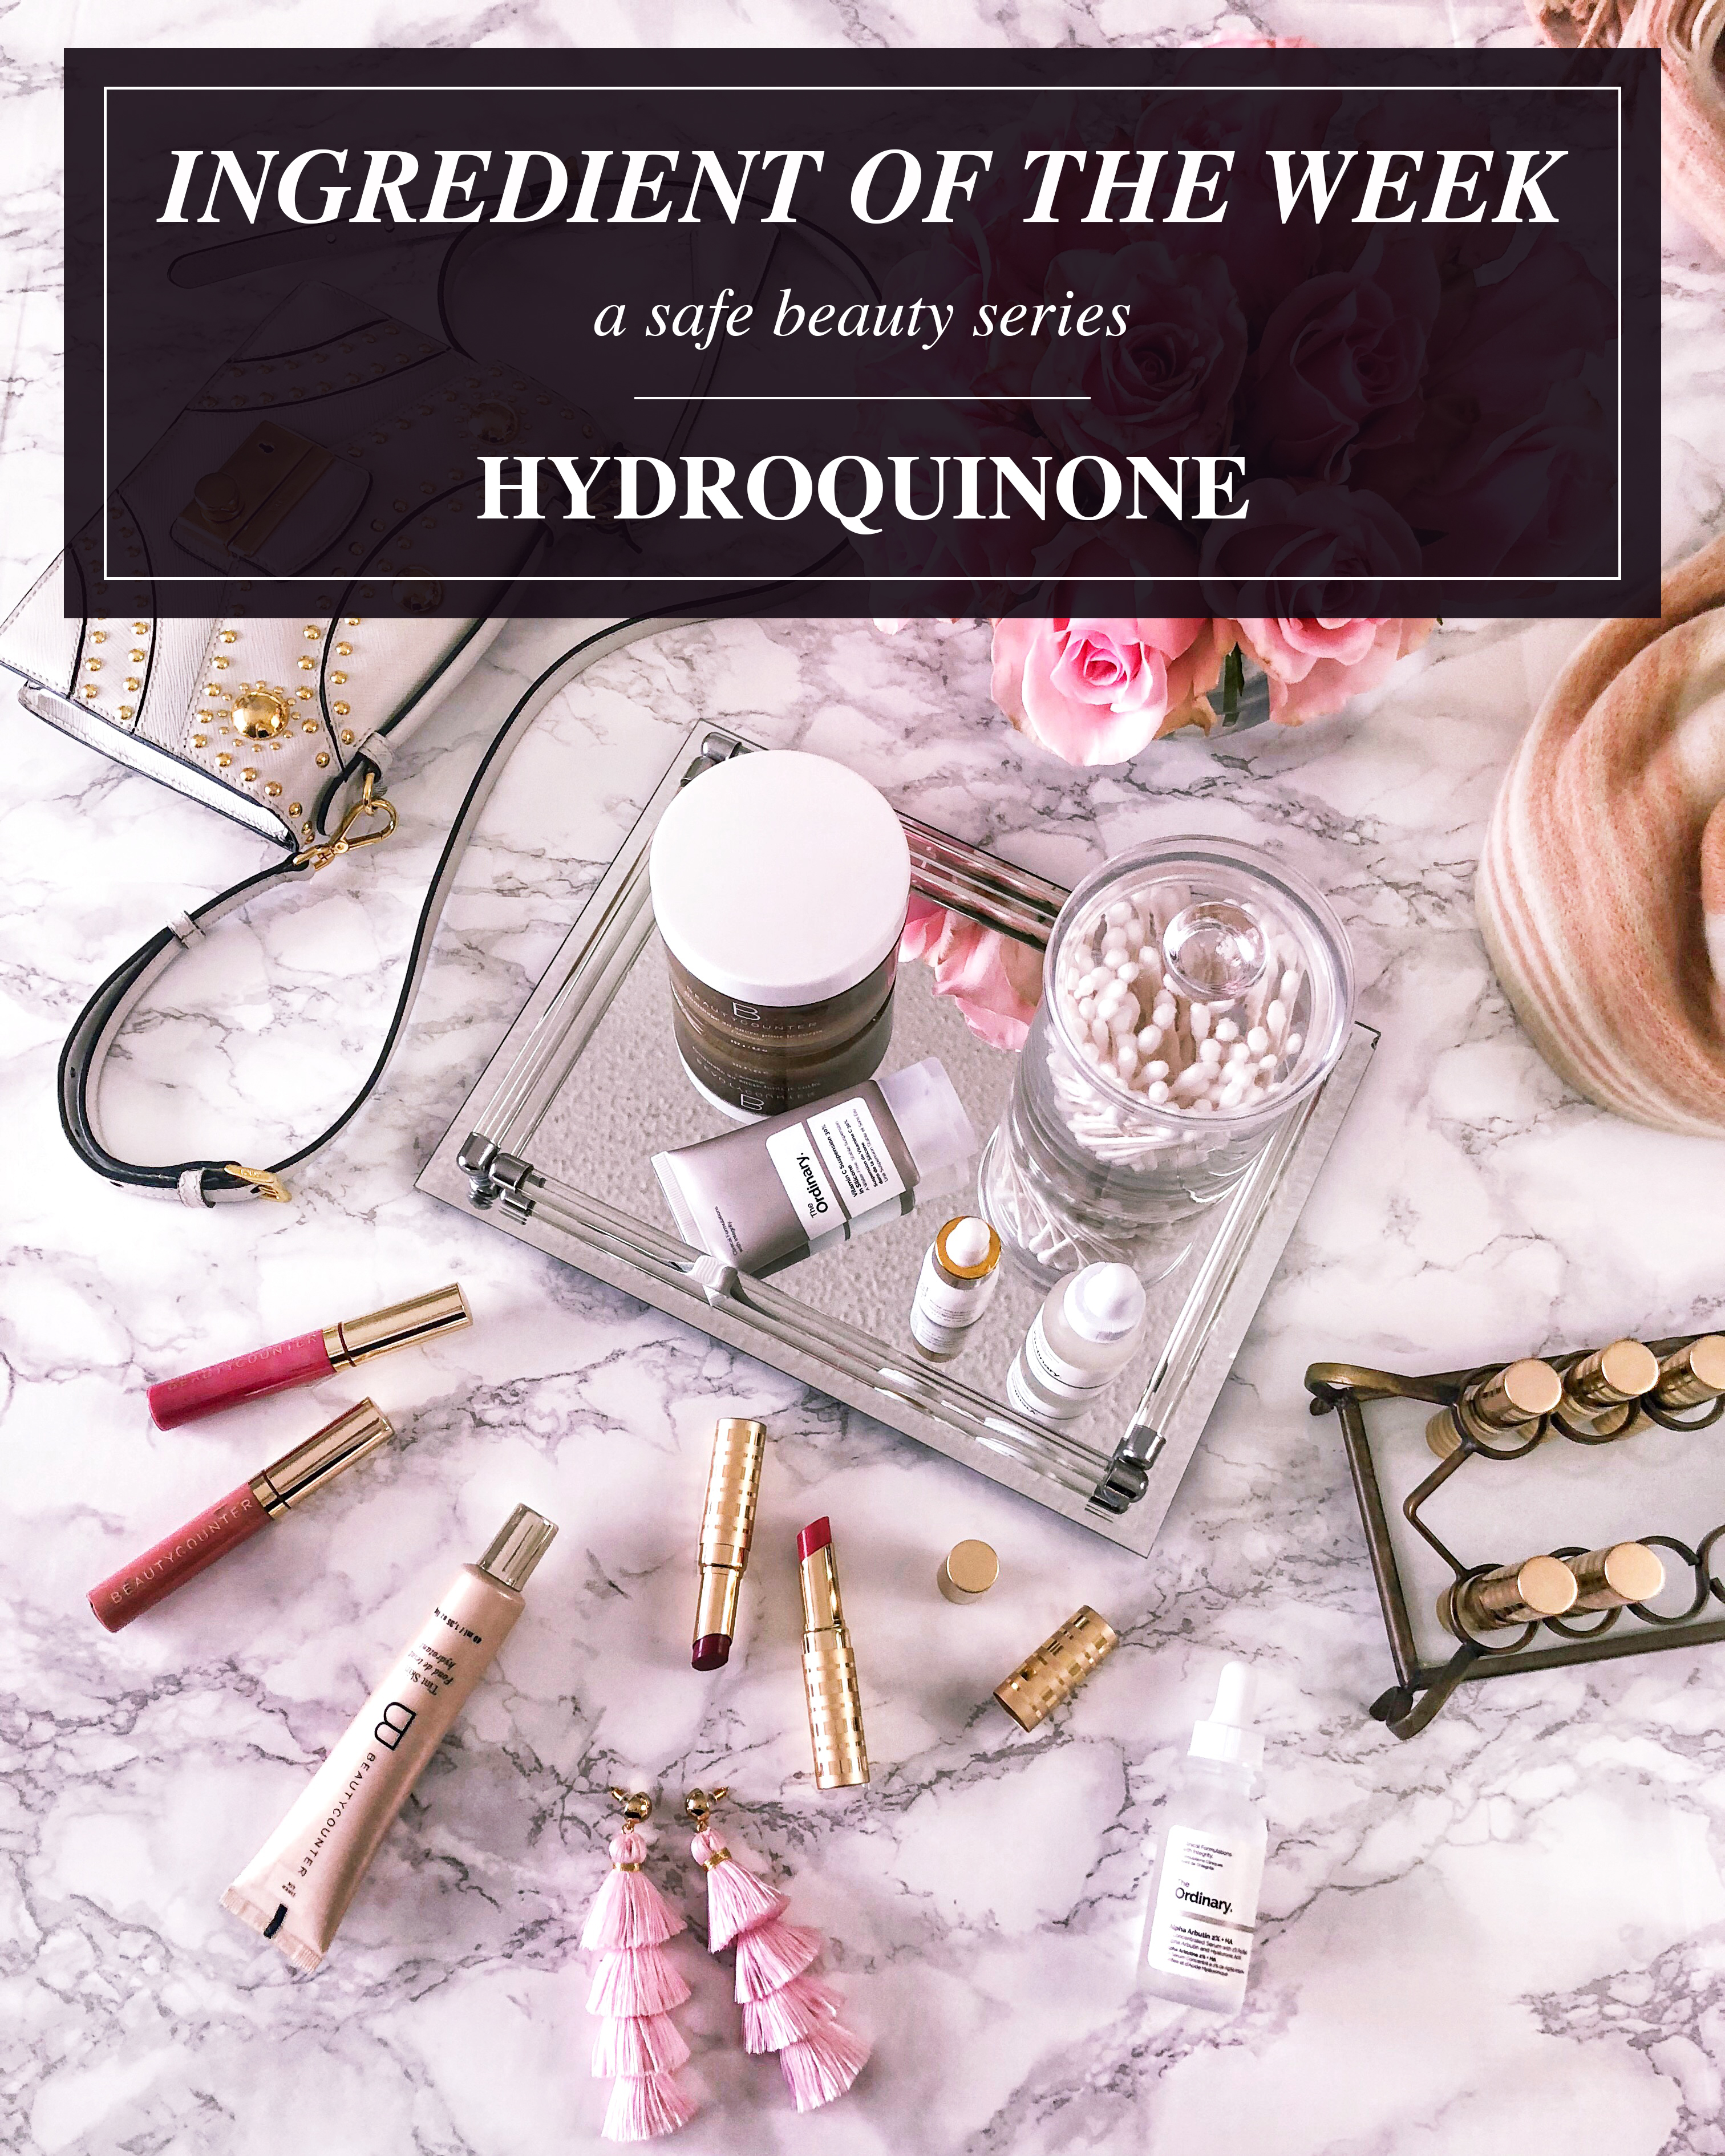 ingredient of the week: a safe beauty series on hydroquinone and if it causes cancer